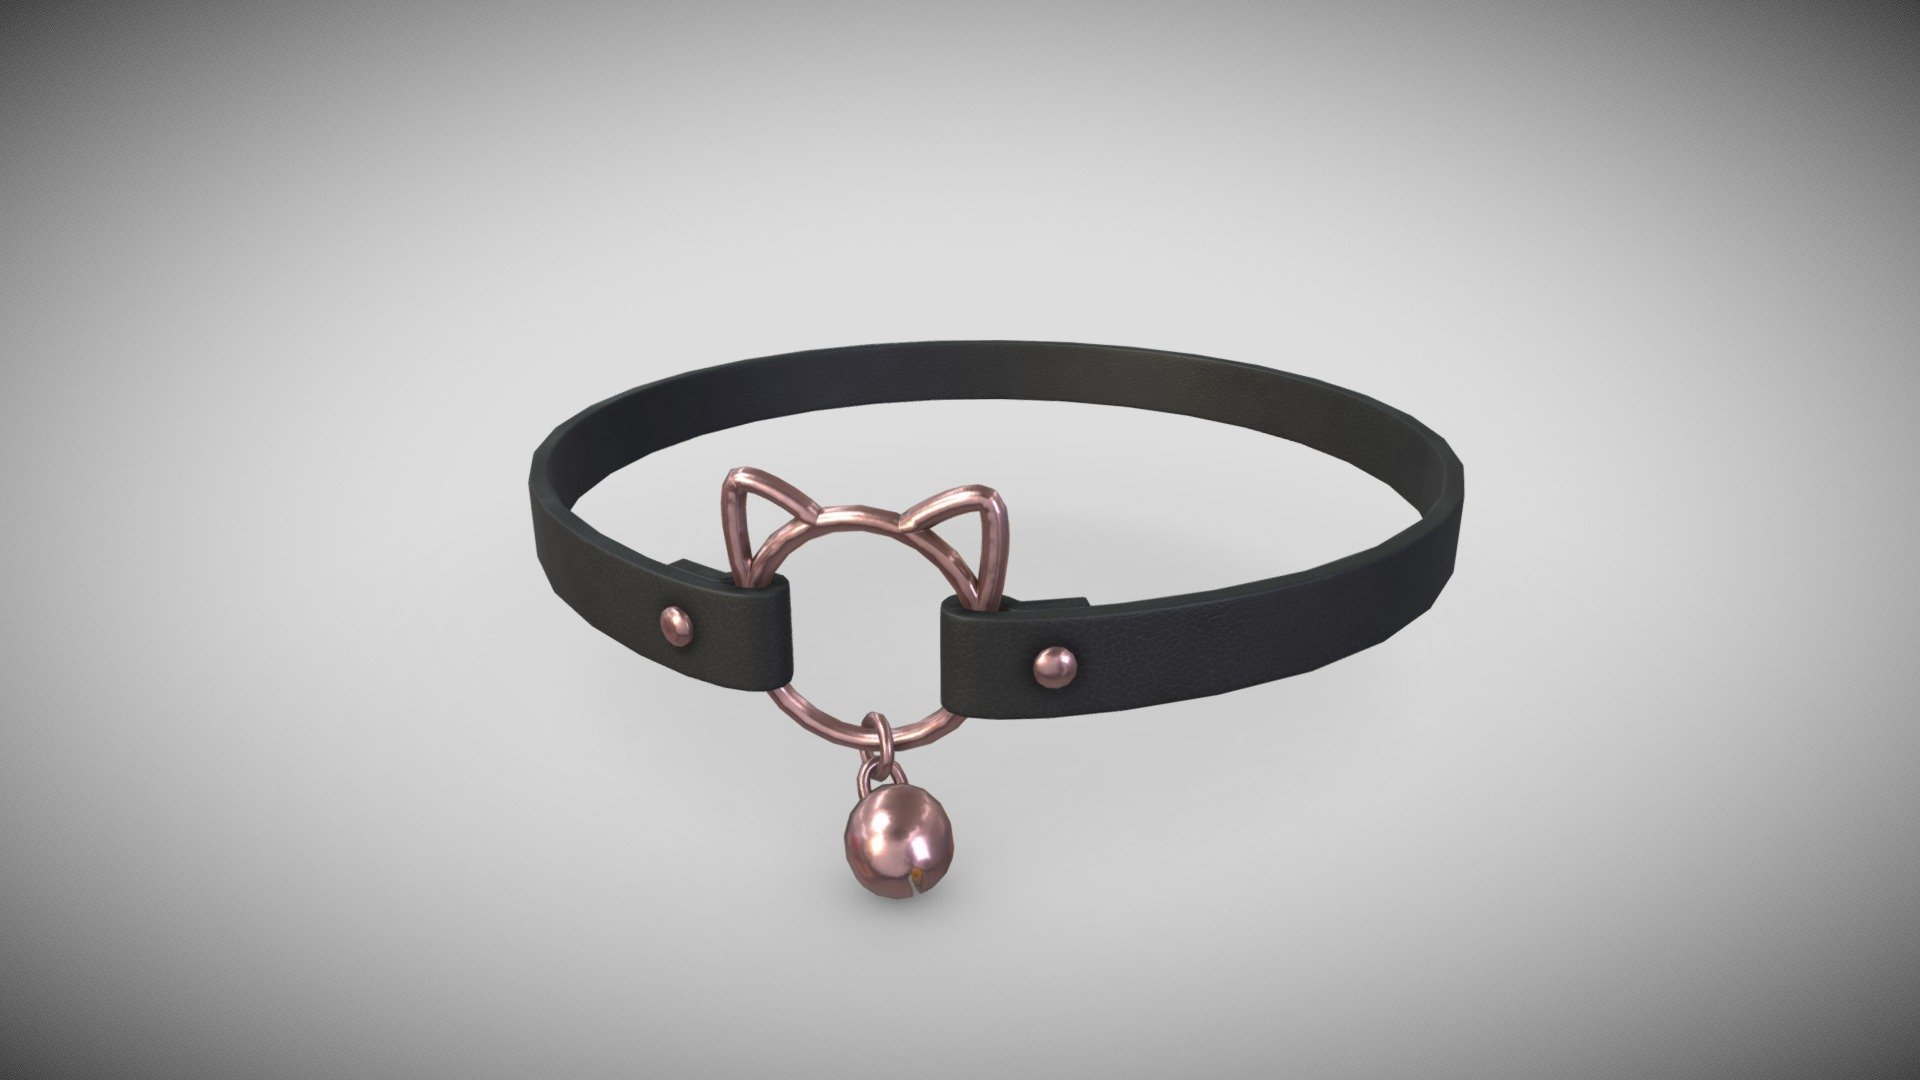 If you need additional work done do not hesitate to contact me, I am currently available for freelance work.

A realistic collar for a character. As cute punky choker for the player in a game with a cat circlet that make the badass/goth/emo/etc. look more cute! Includes a Bell, metal parts are rose gold colored.
Full retopology and pbr textured.

Highpoly sculpted in Nomadsculpt. Lowpoly made in Blender Highpoly and Lowpoly-model are in a Blend-file included in additional file with embedded materials. Model and Concept by Me, Enya Gerber 3d model